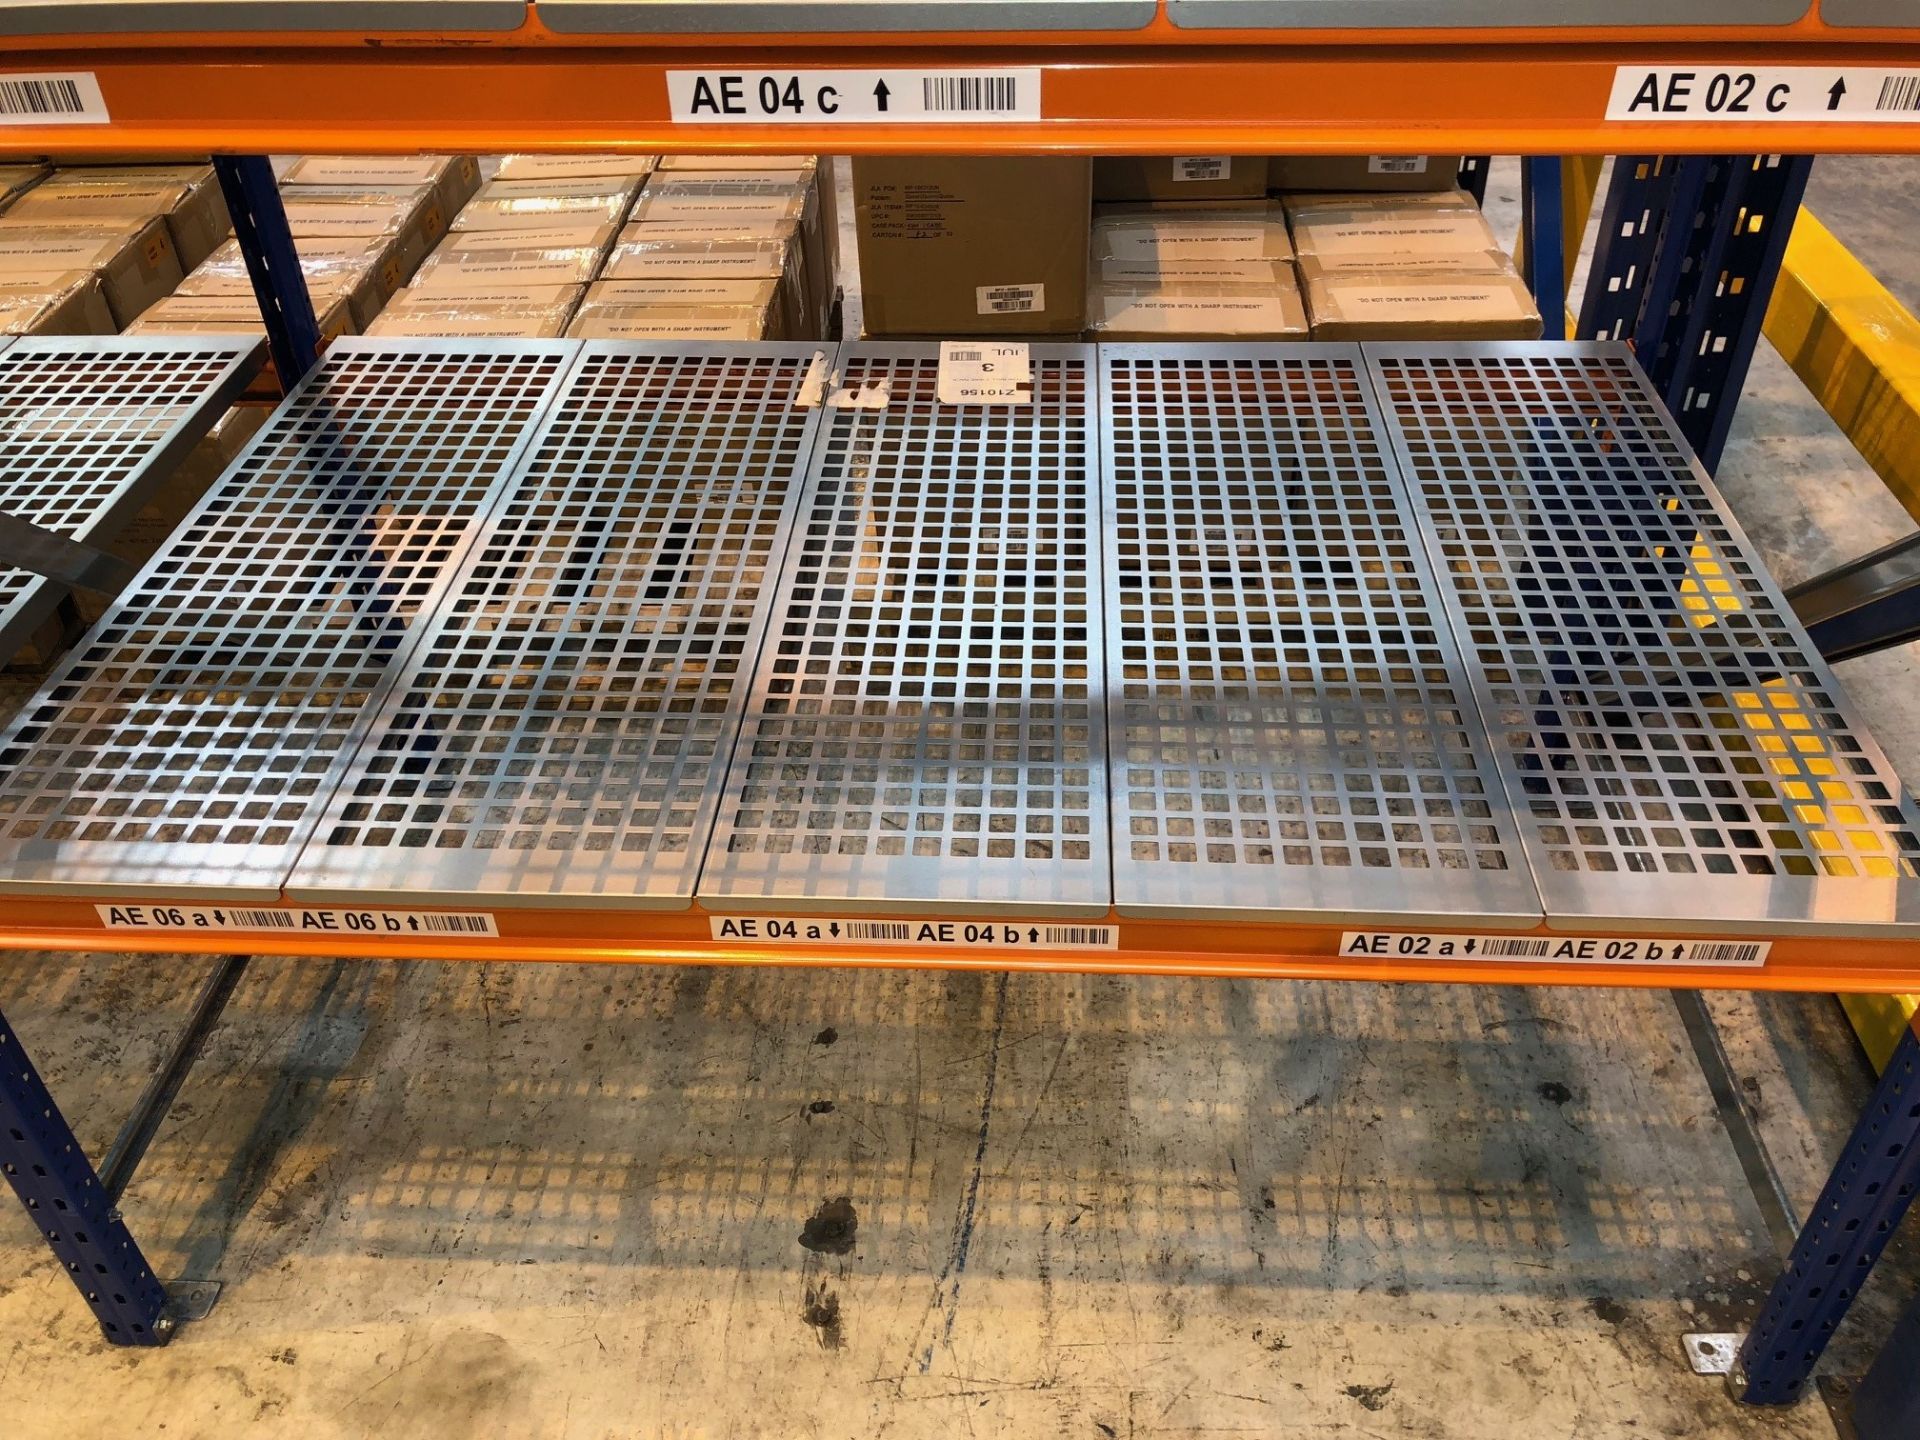 2 x Bays of Small Warehouse Racking/Shelving - Excellent Condition (L1500xH1500xD900mm - 3 x - Image 4 of 4